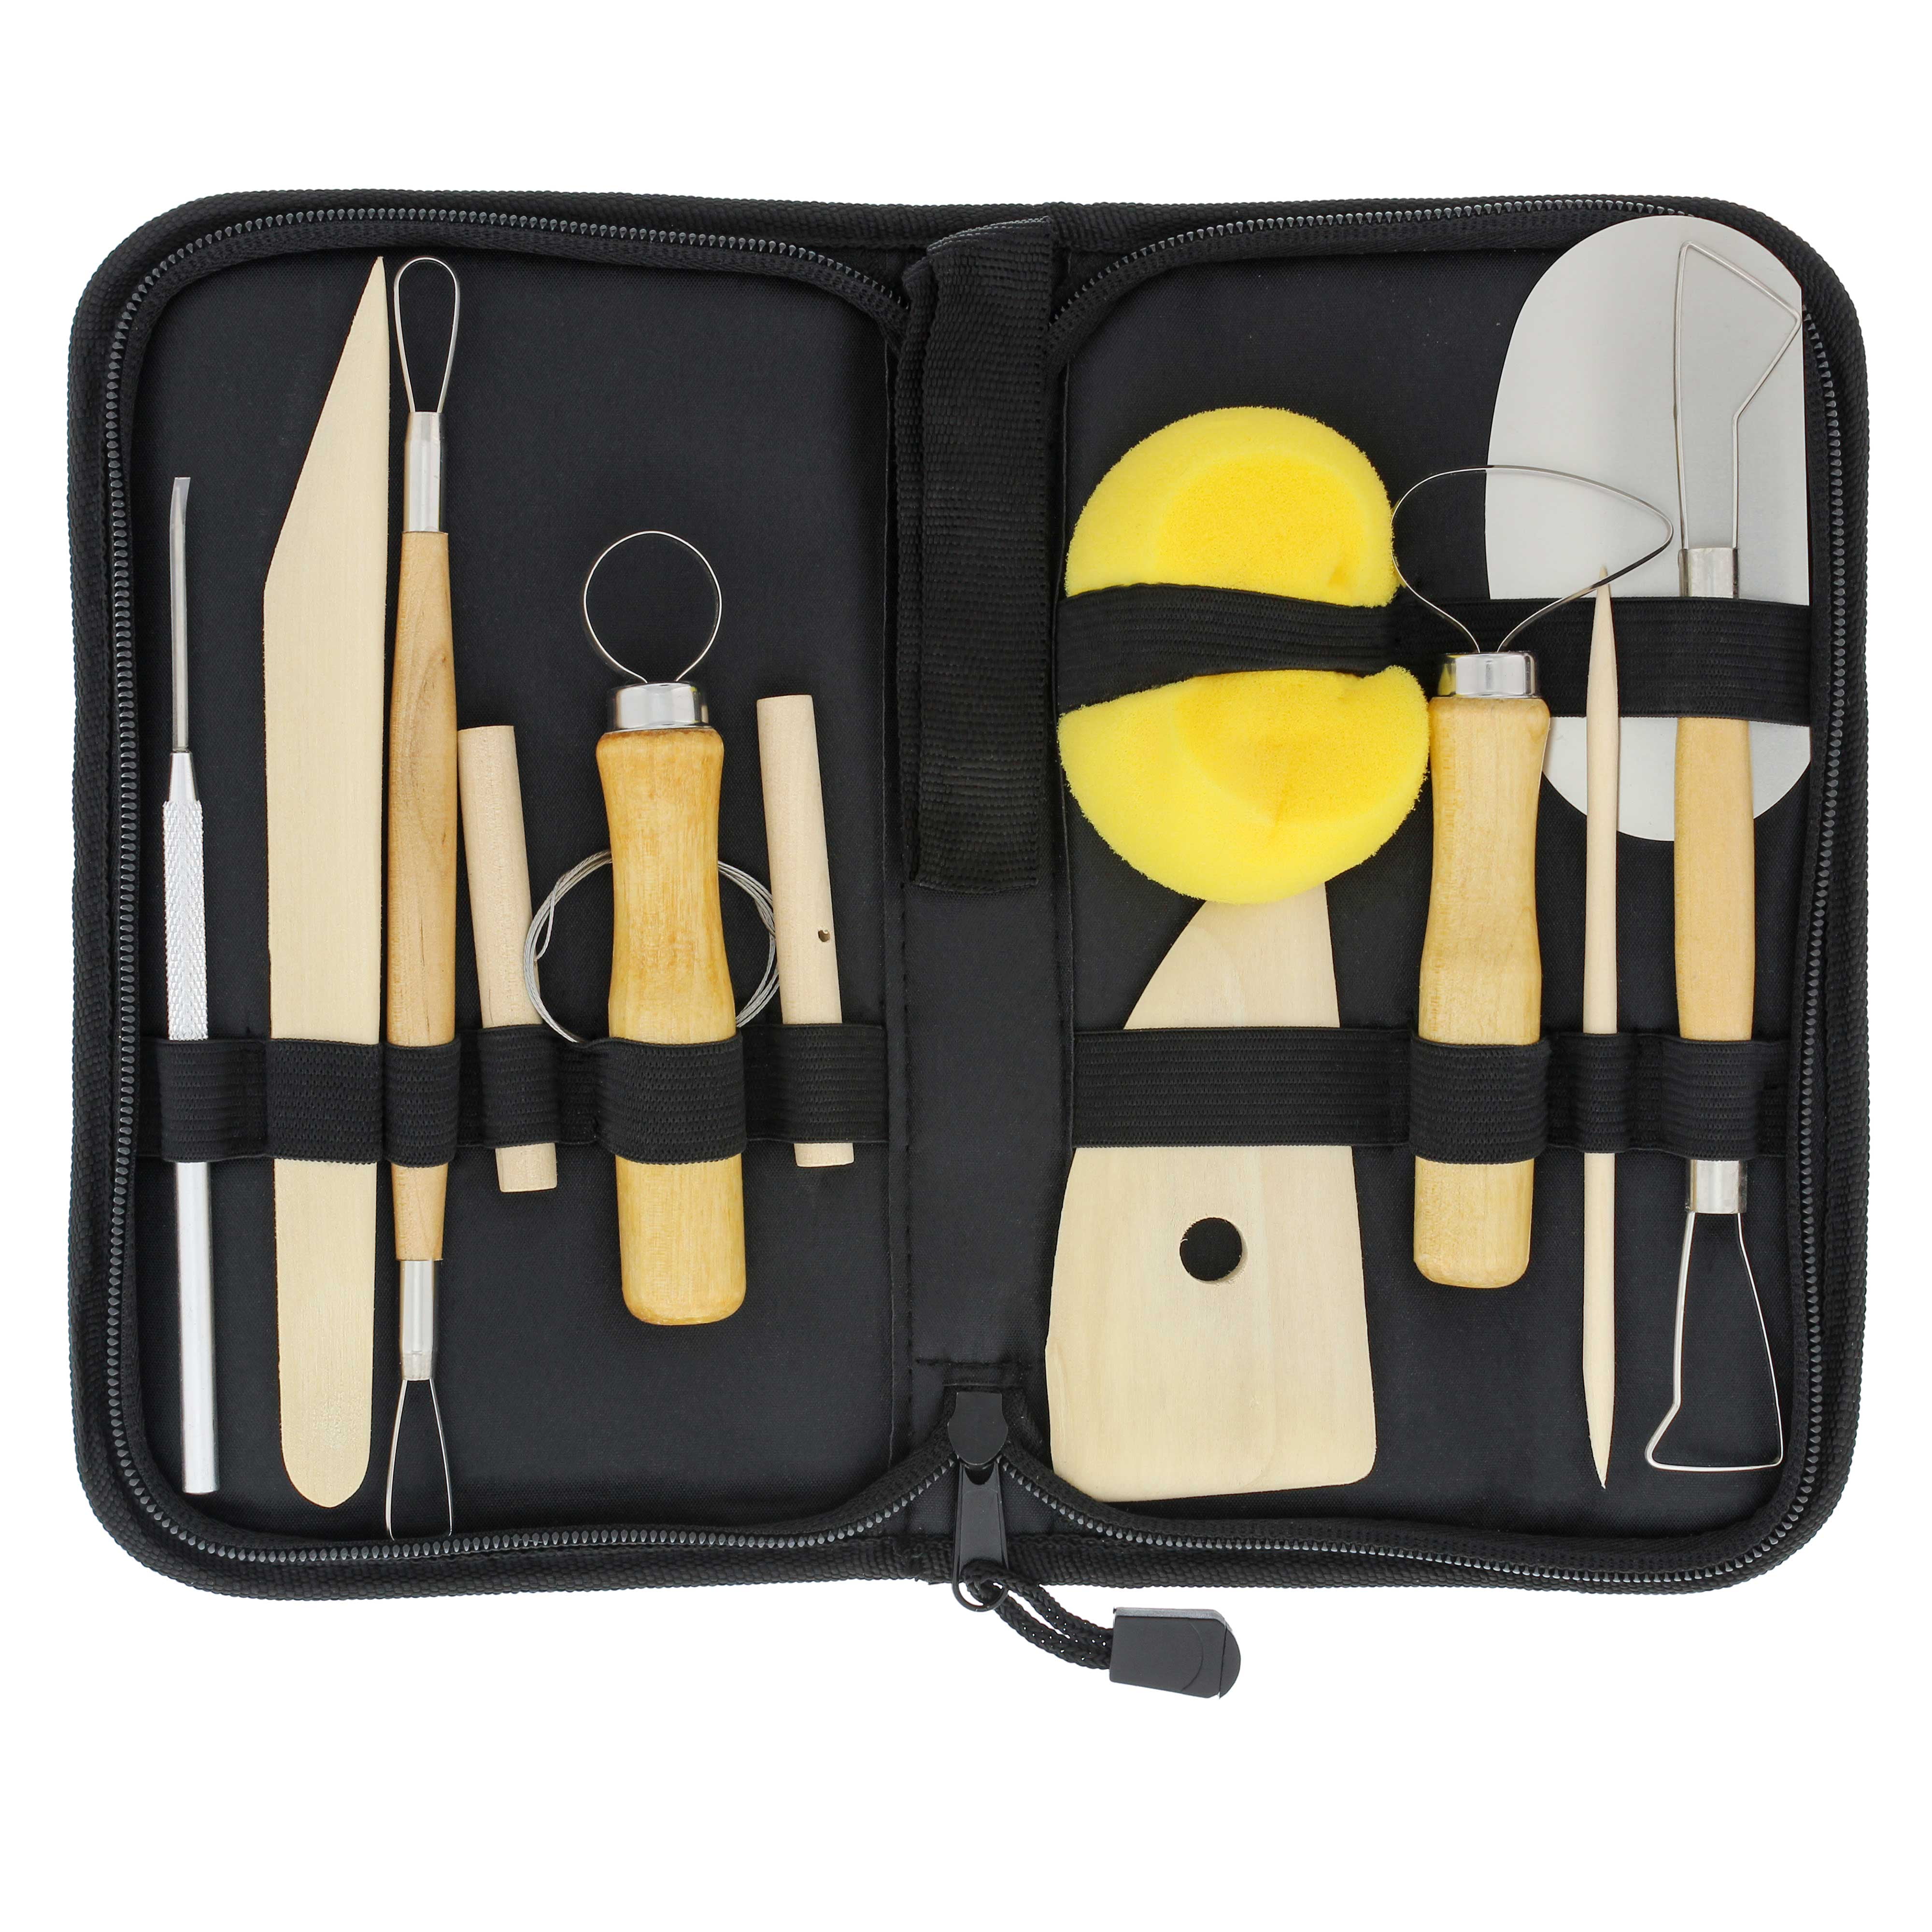 National Artcraft Potter's Tool Kit Contains 8 Essential Tools for